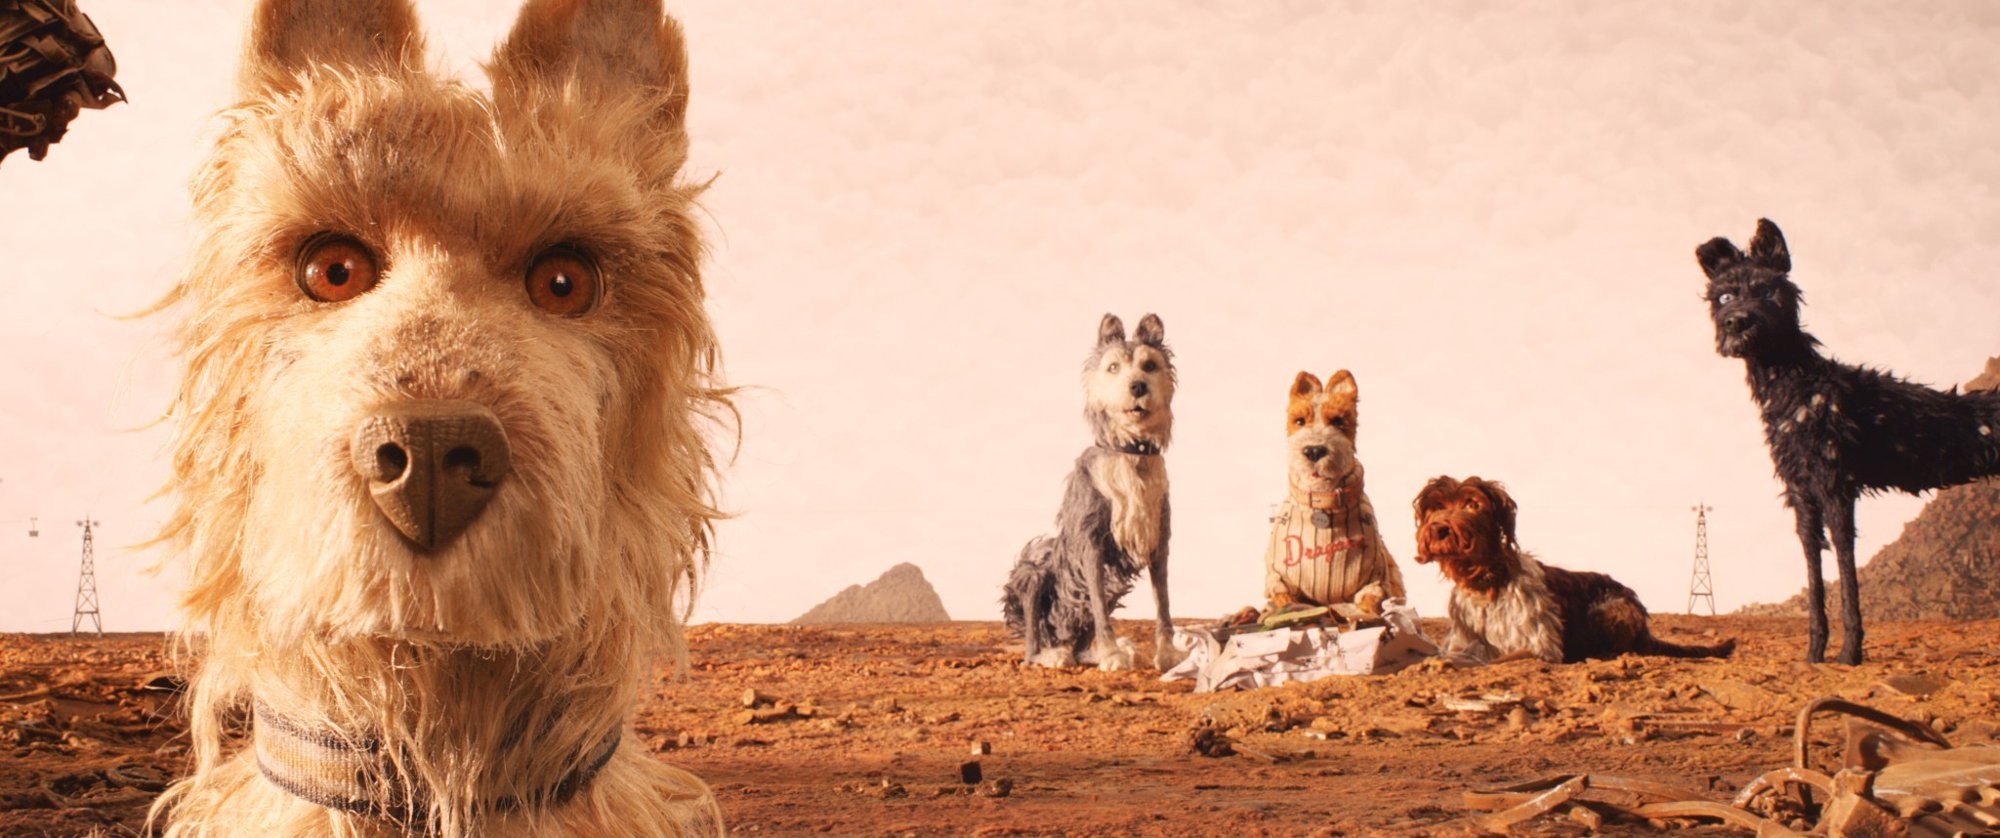 Rex, Duke, Boss, King and Chief from Fox Searchlight Pictures' Isle of Dogs (2018)